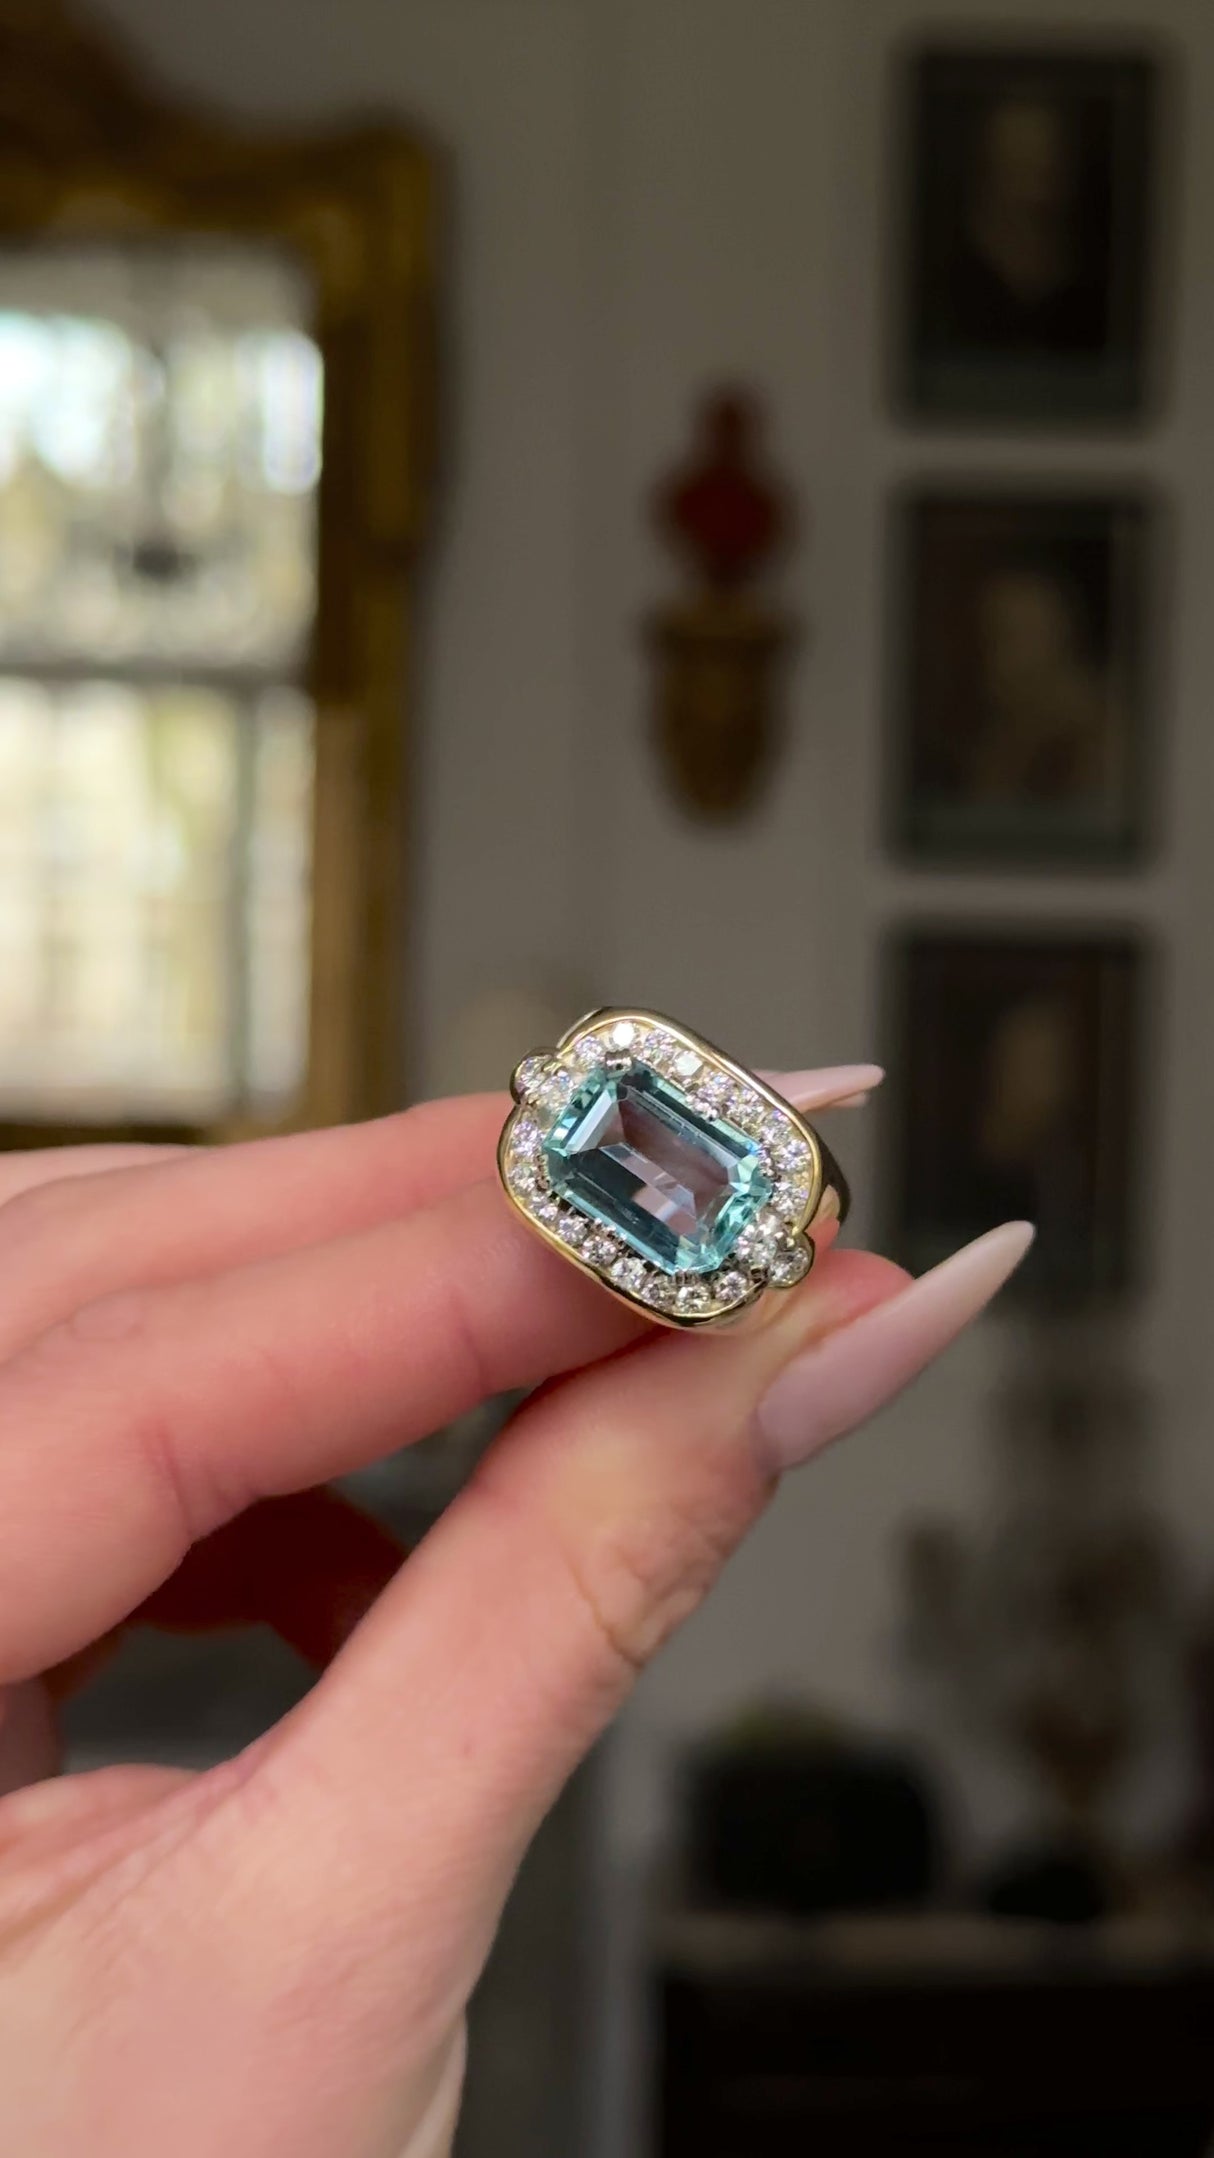 Aquamarine and diamond cocktail ring held in fingers and moved around to give perspective.